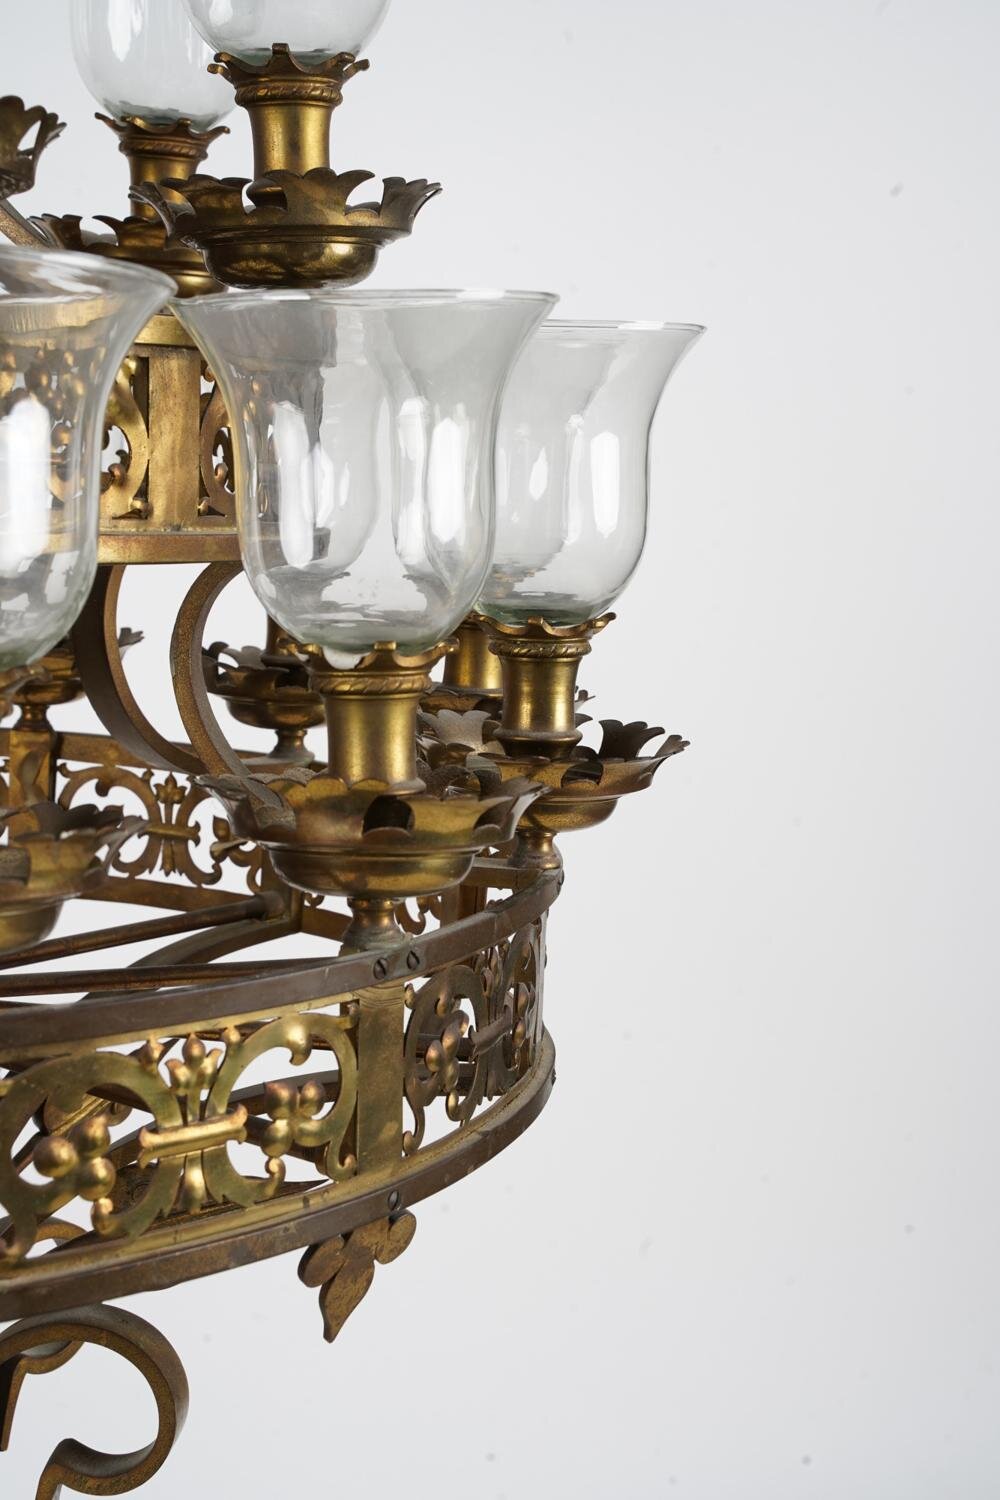 AL1-002: GOTHIC REVIVAL STYLE CHANDELIER